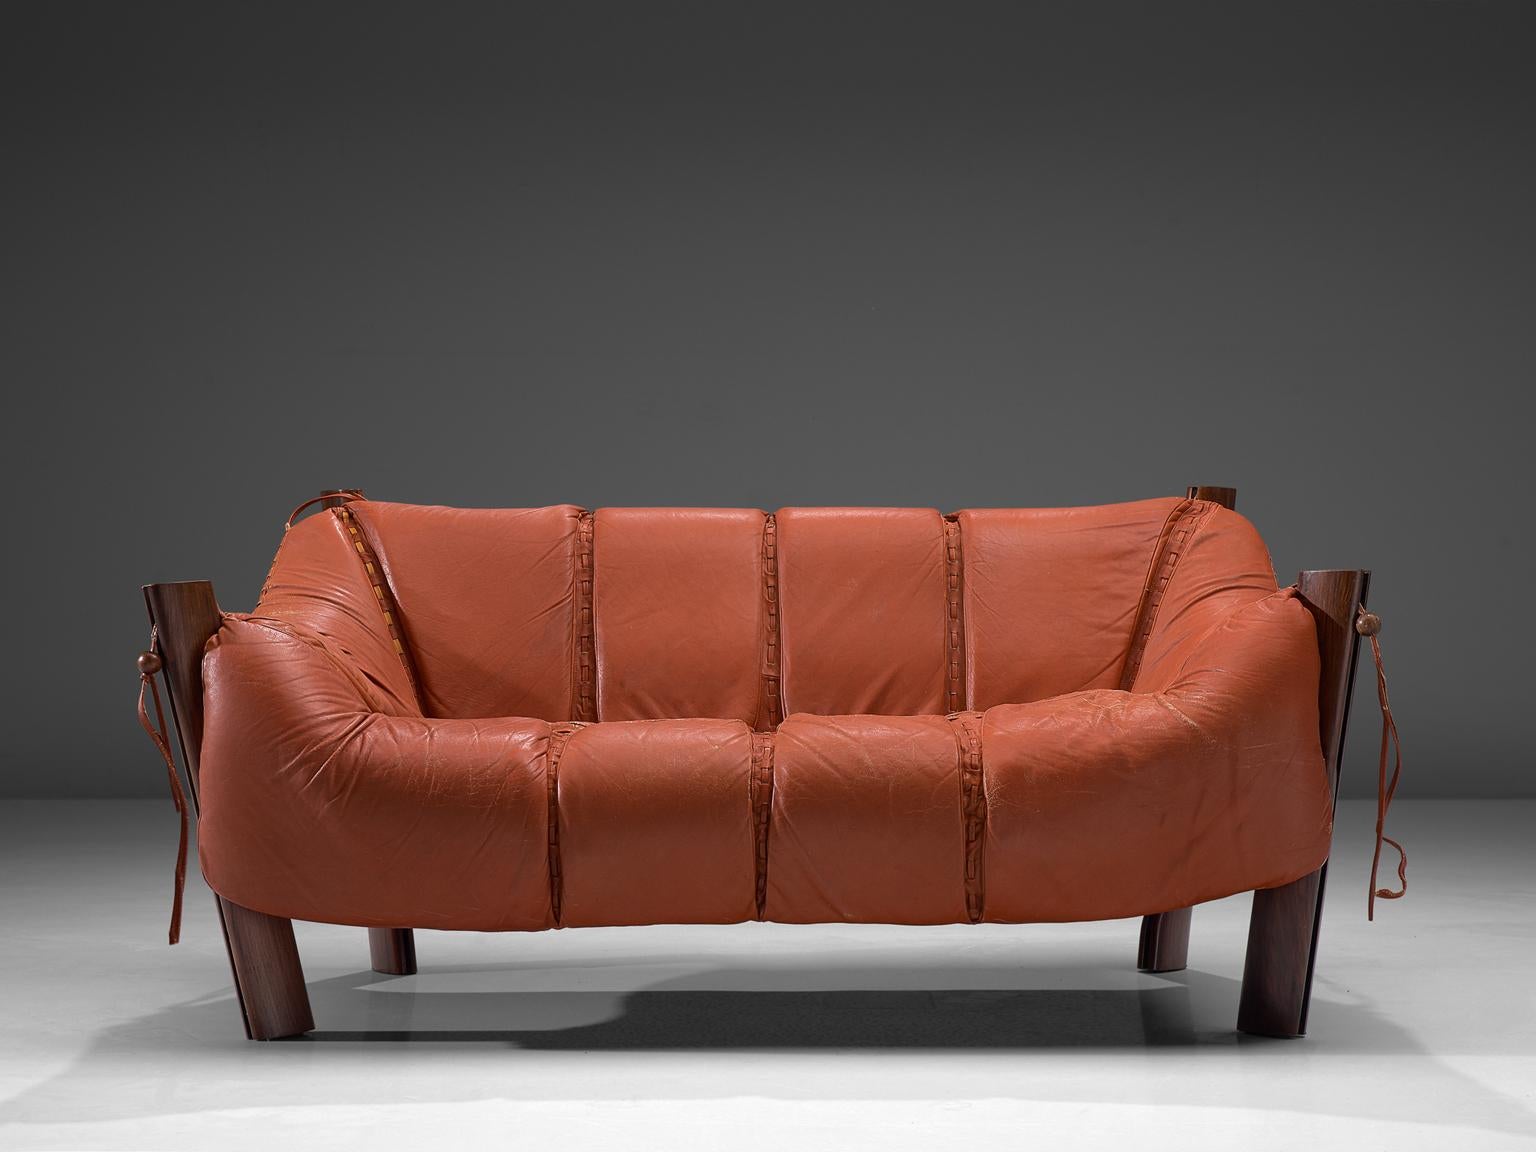 Percival Lafer, Sofa model MP-211, in wood and leather, Brazil, 1974. 

Two-seat sofa by Brazilian designer Percival Lafer. This sofa consists of a solid Jacaranda base in which the leather seating 'hangs'. Soft cushions are folded over the